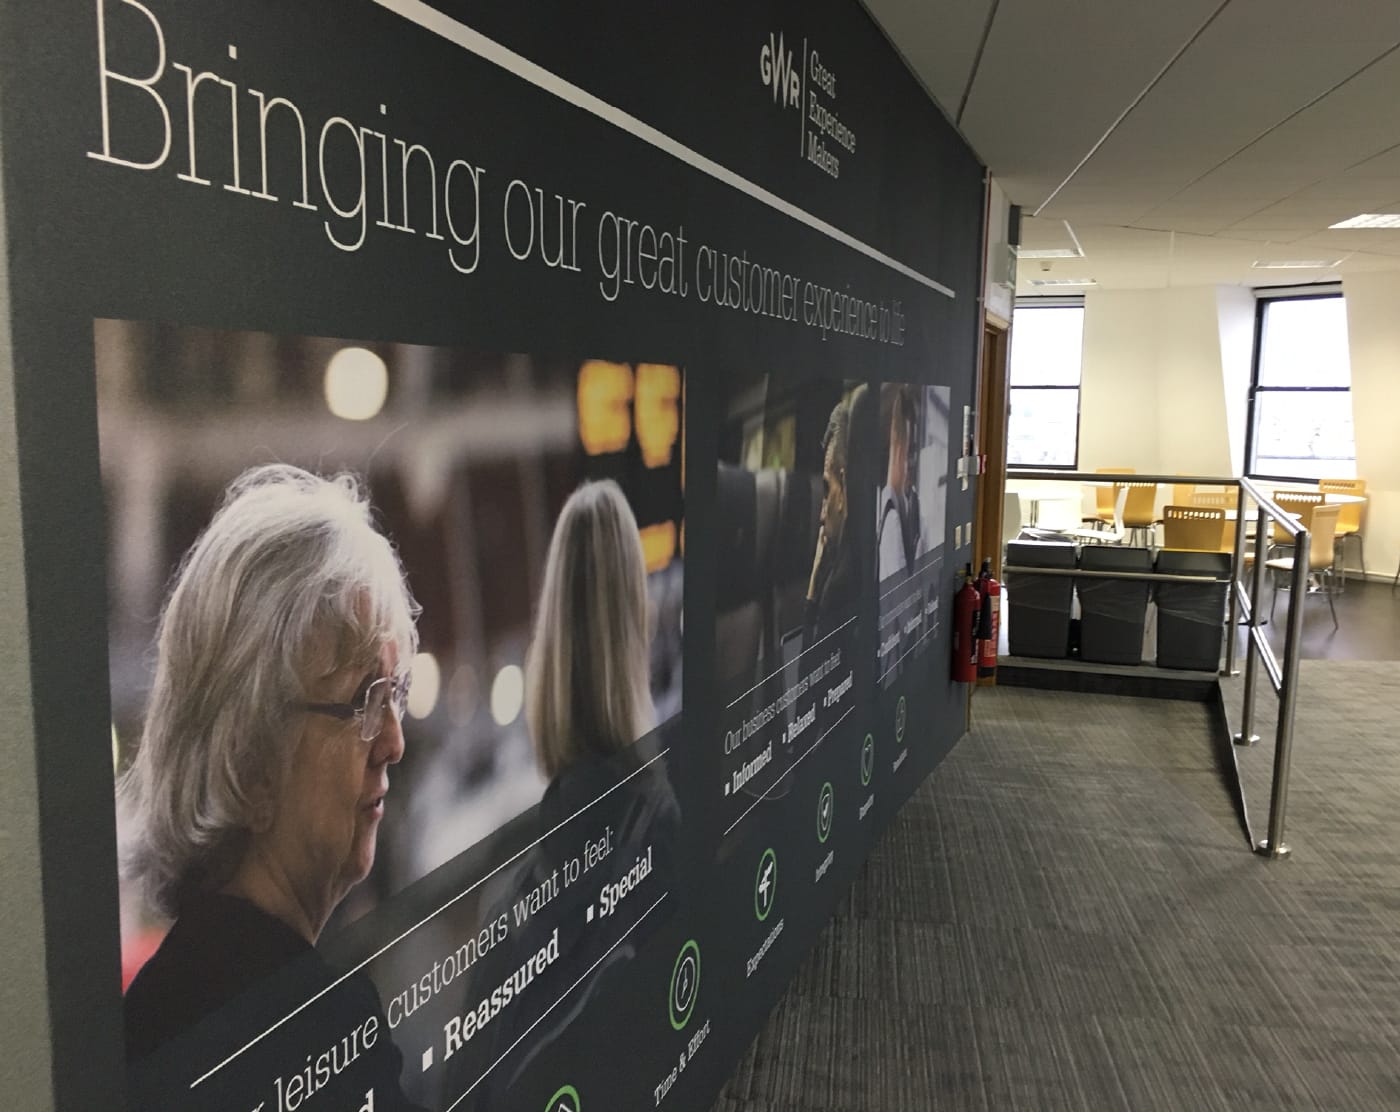 Design of branded training environments created with the aim of helping to deliver improved customer service on behalf one of the UK's largest train operating companies.